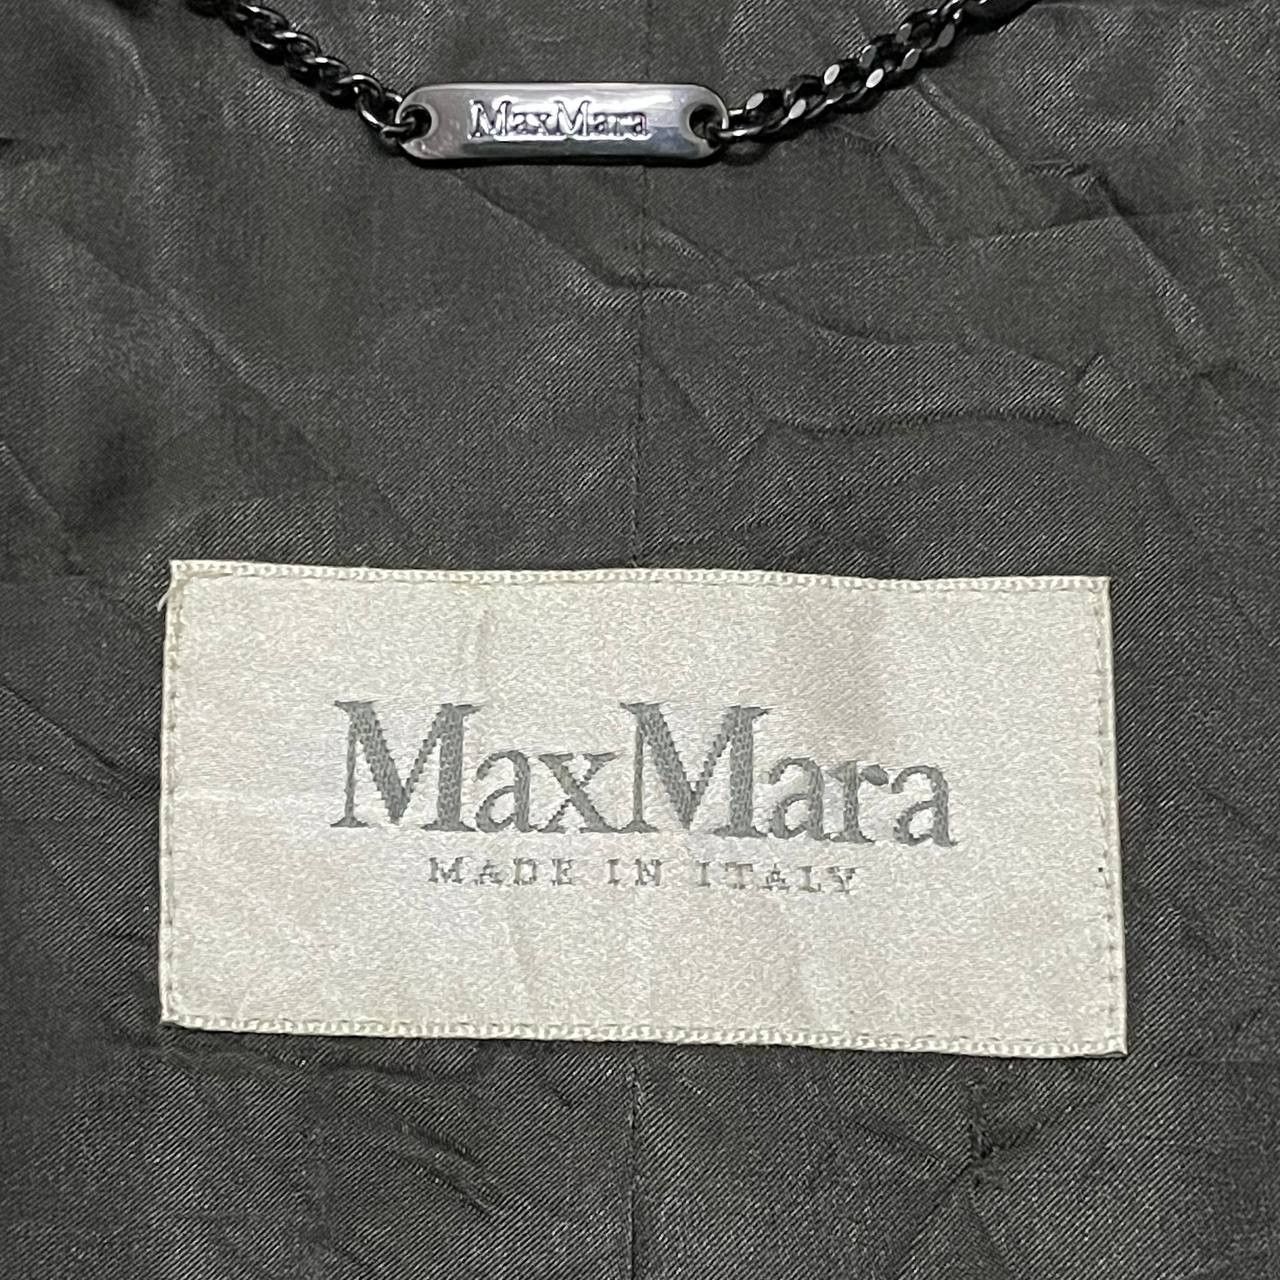 Archival Clothing - Archive Max Mara Made in Italy Wool Coat - 7